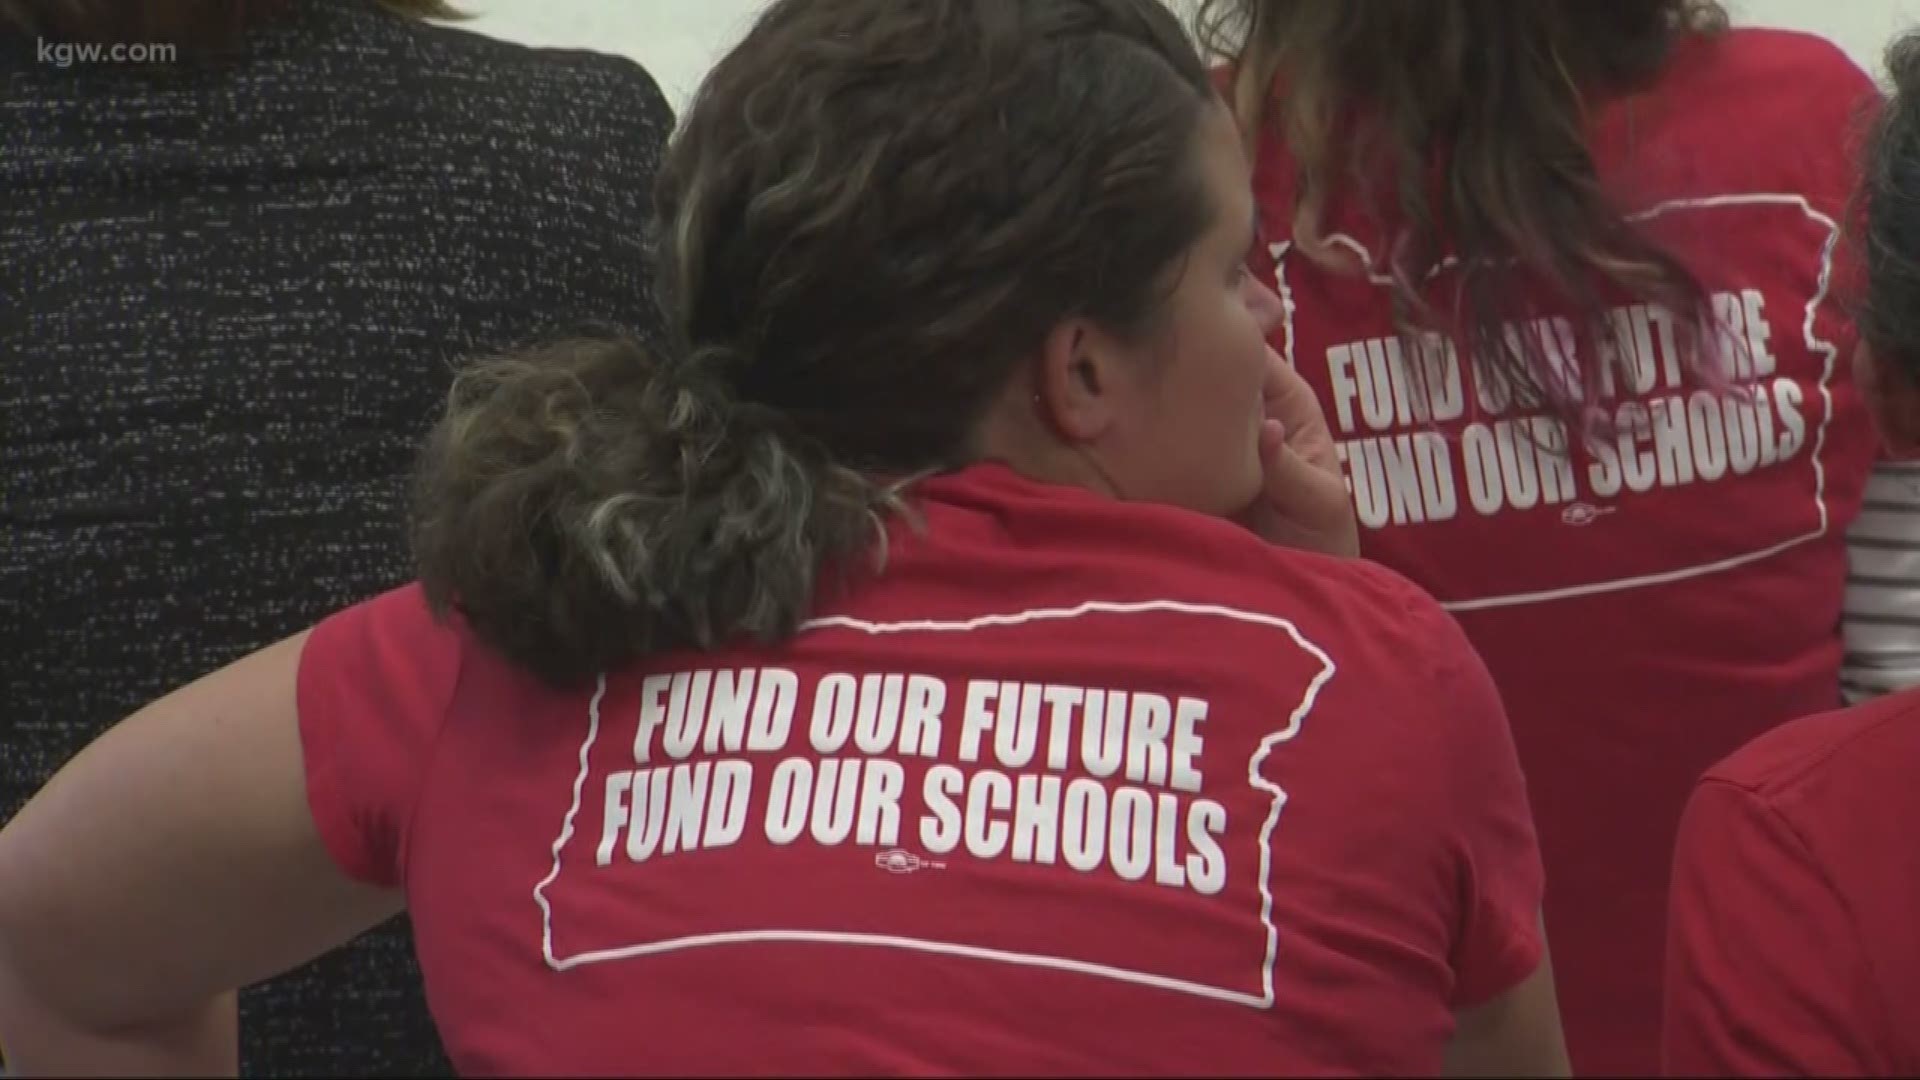 The Oregon Senate is expected to approve a $2 billion tax on some businesses to give schools extra money.